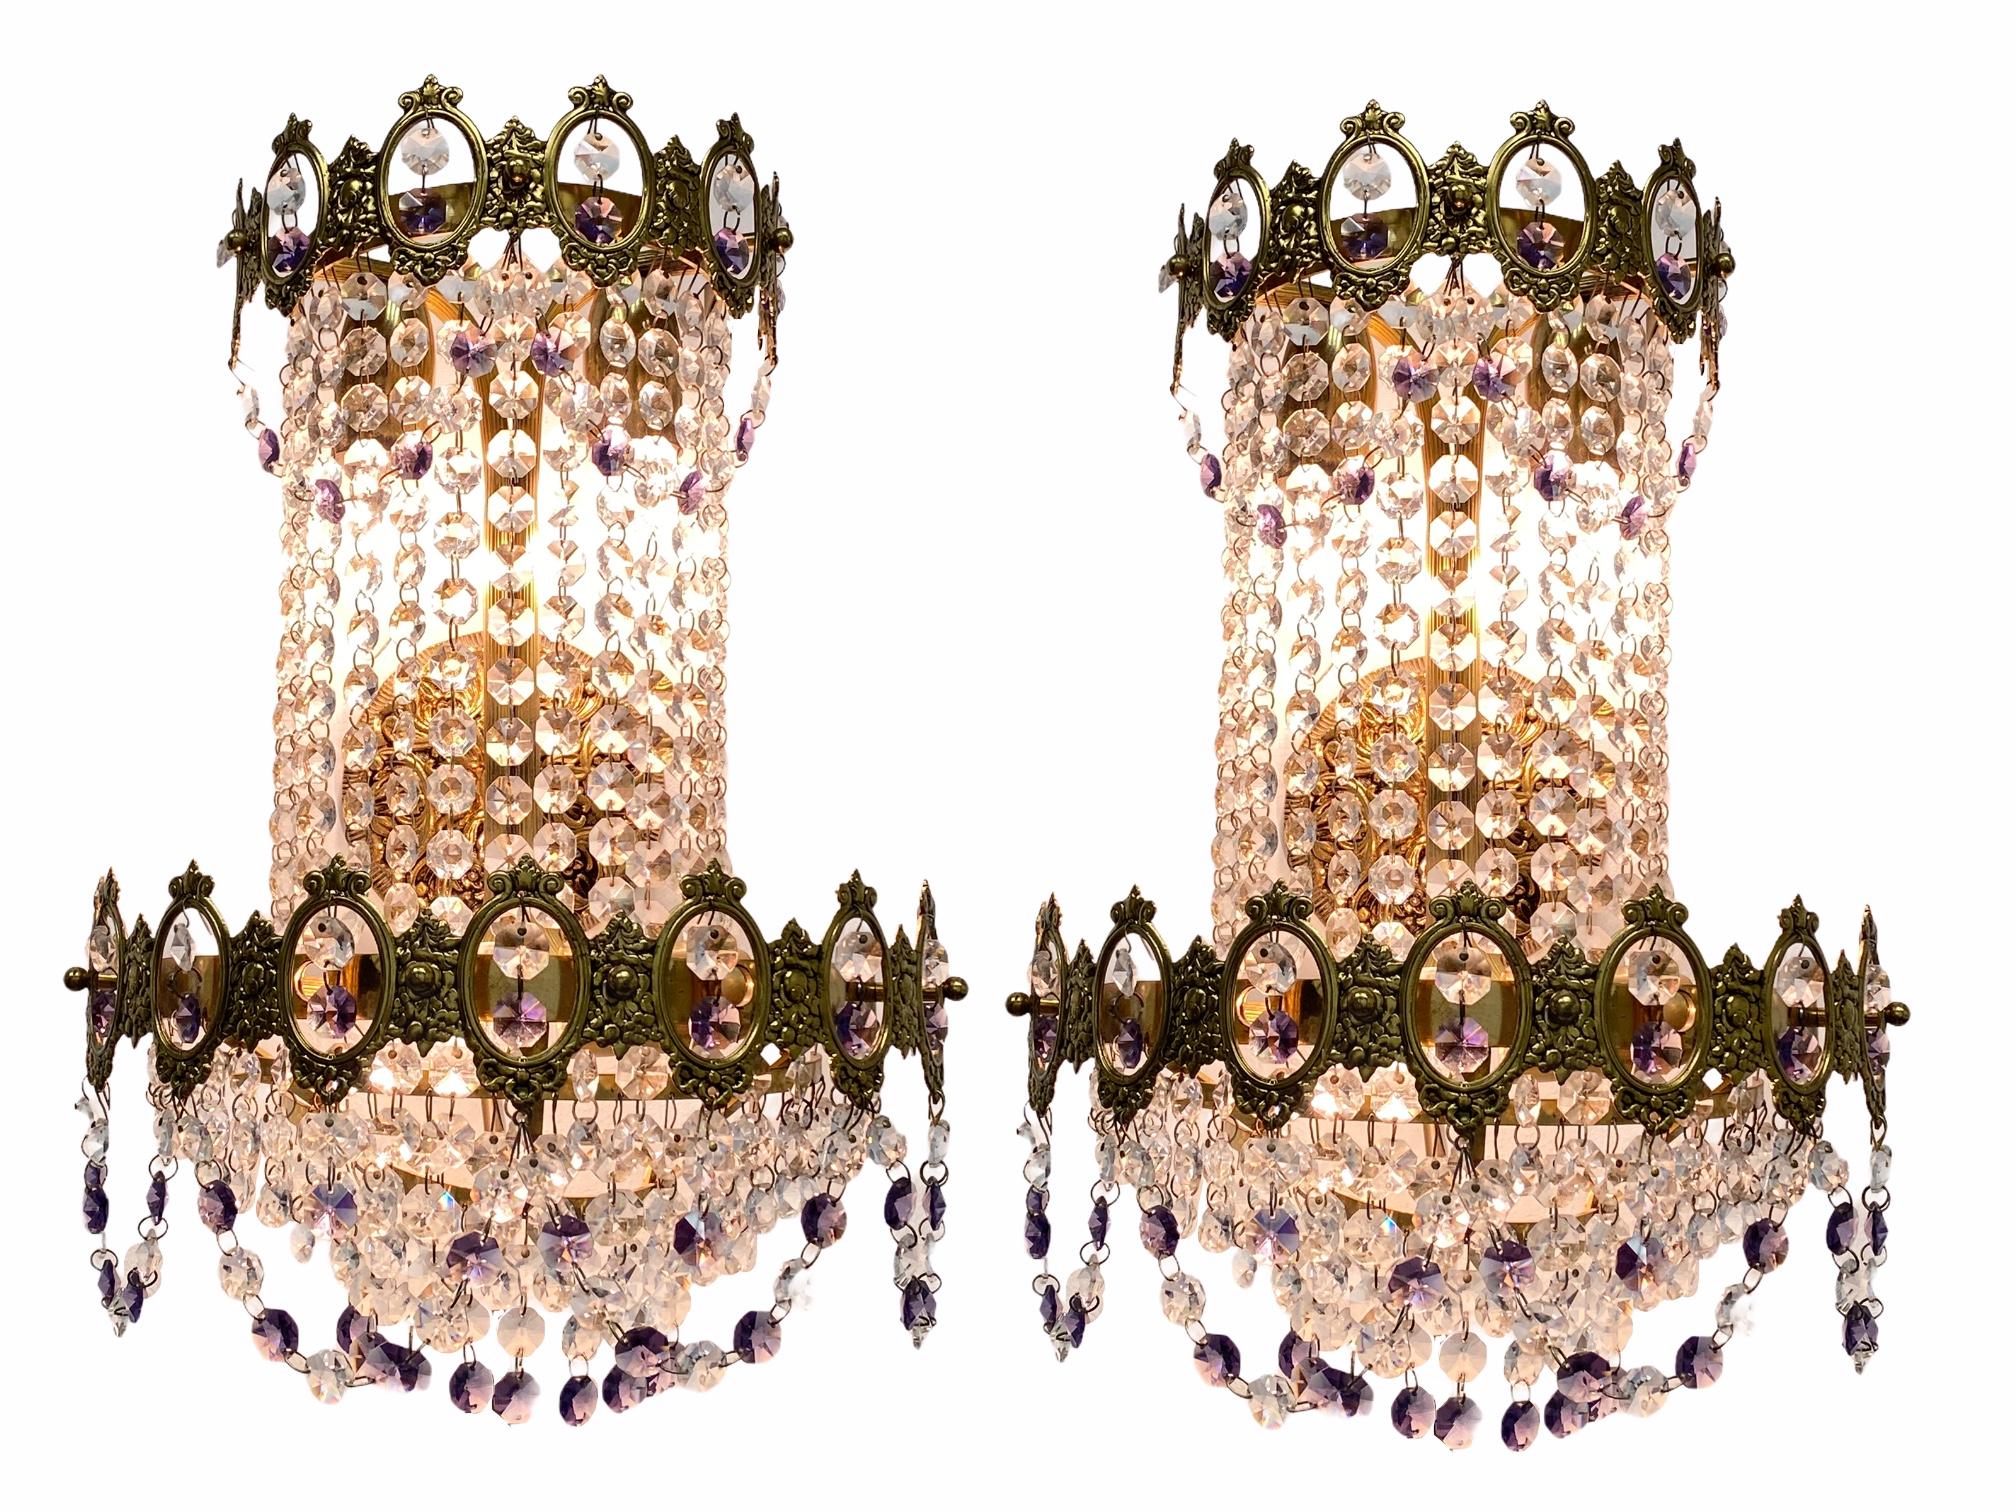 Pair of gilt bronze and crystal 1930s or older, waterfall sconces in empire style. Each fixture requires three European E14 candelabra bulbs, each bulb up to 40 watts. The wall lights have a beautiful patina and gives each room an eclectic